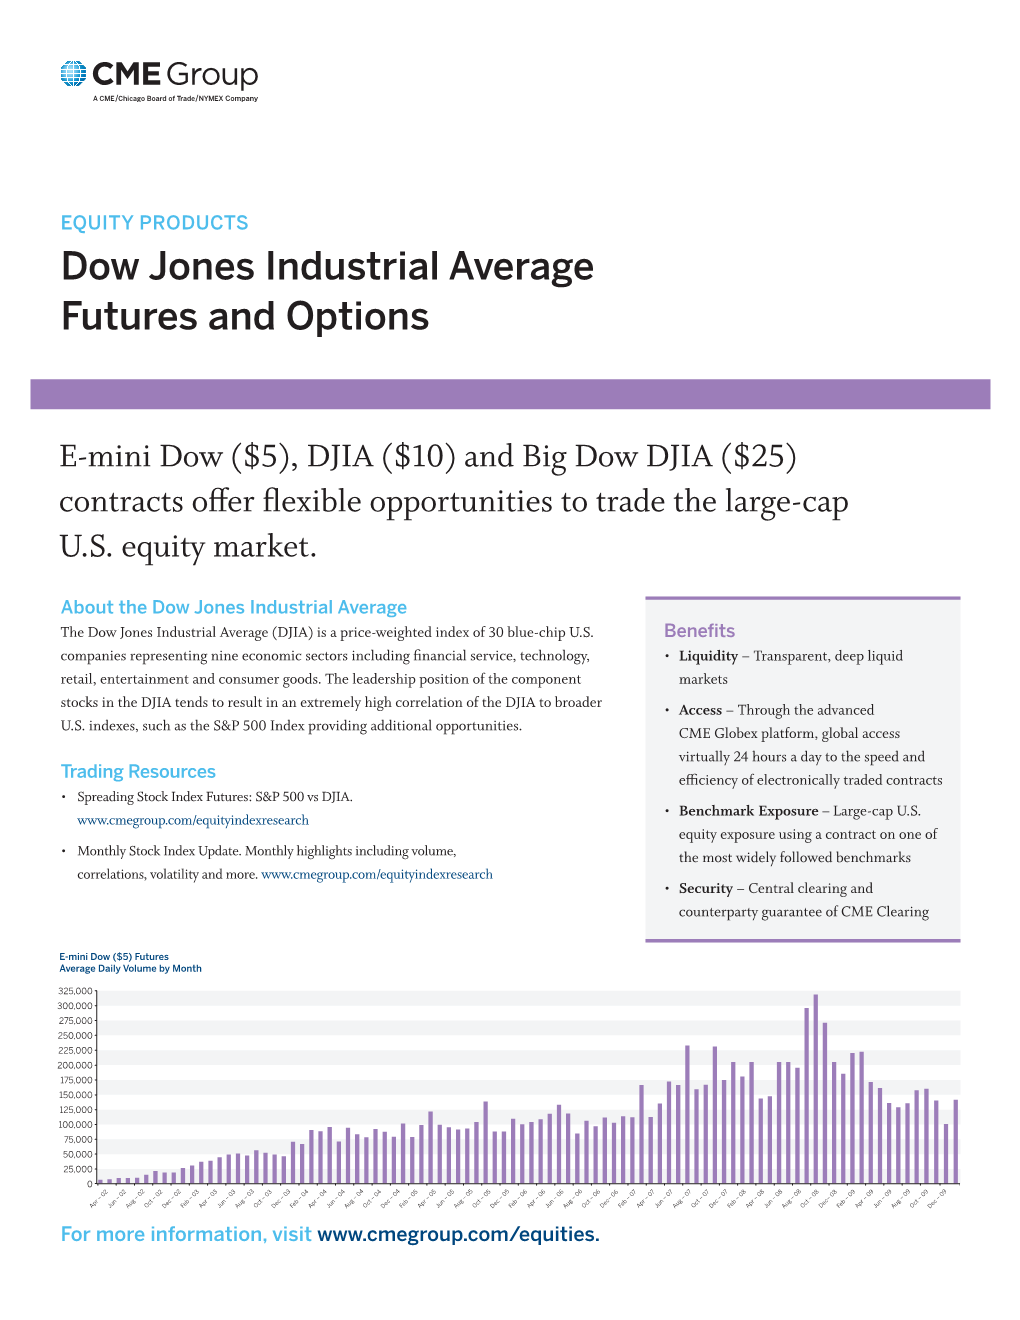 Dow Jones Industrial Average Futures and Options